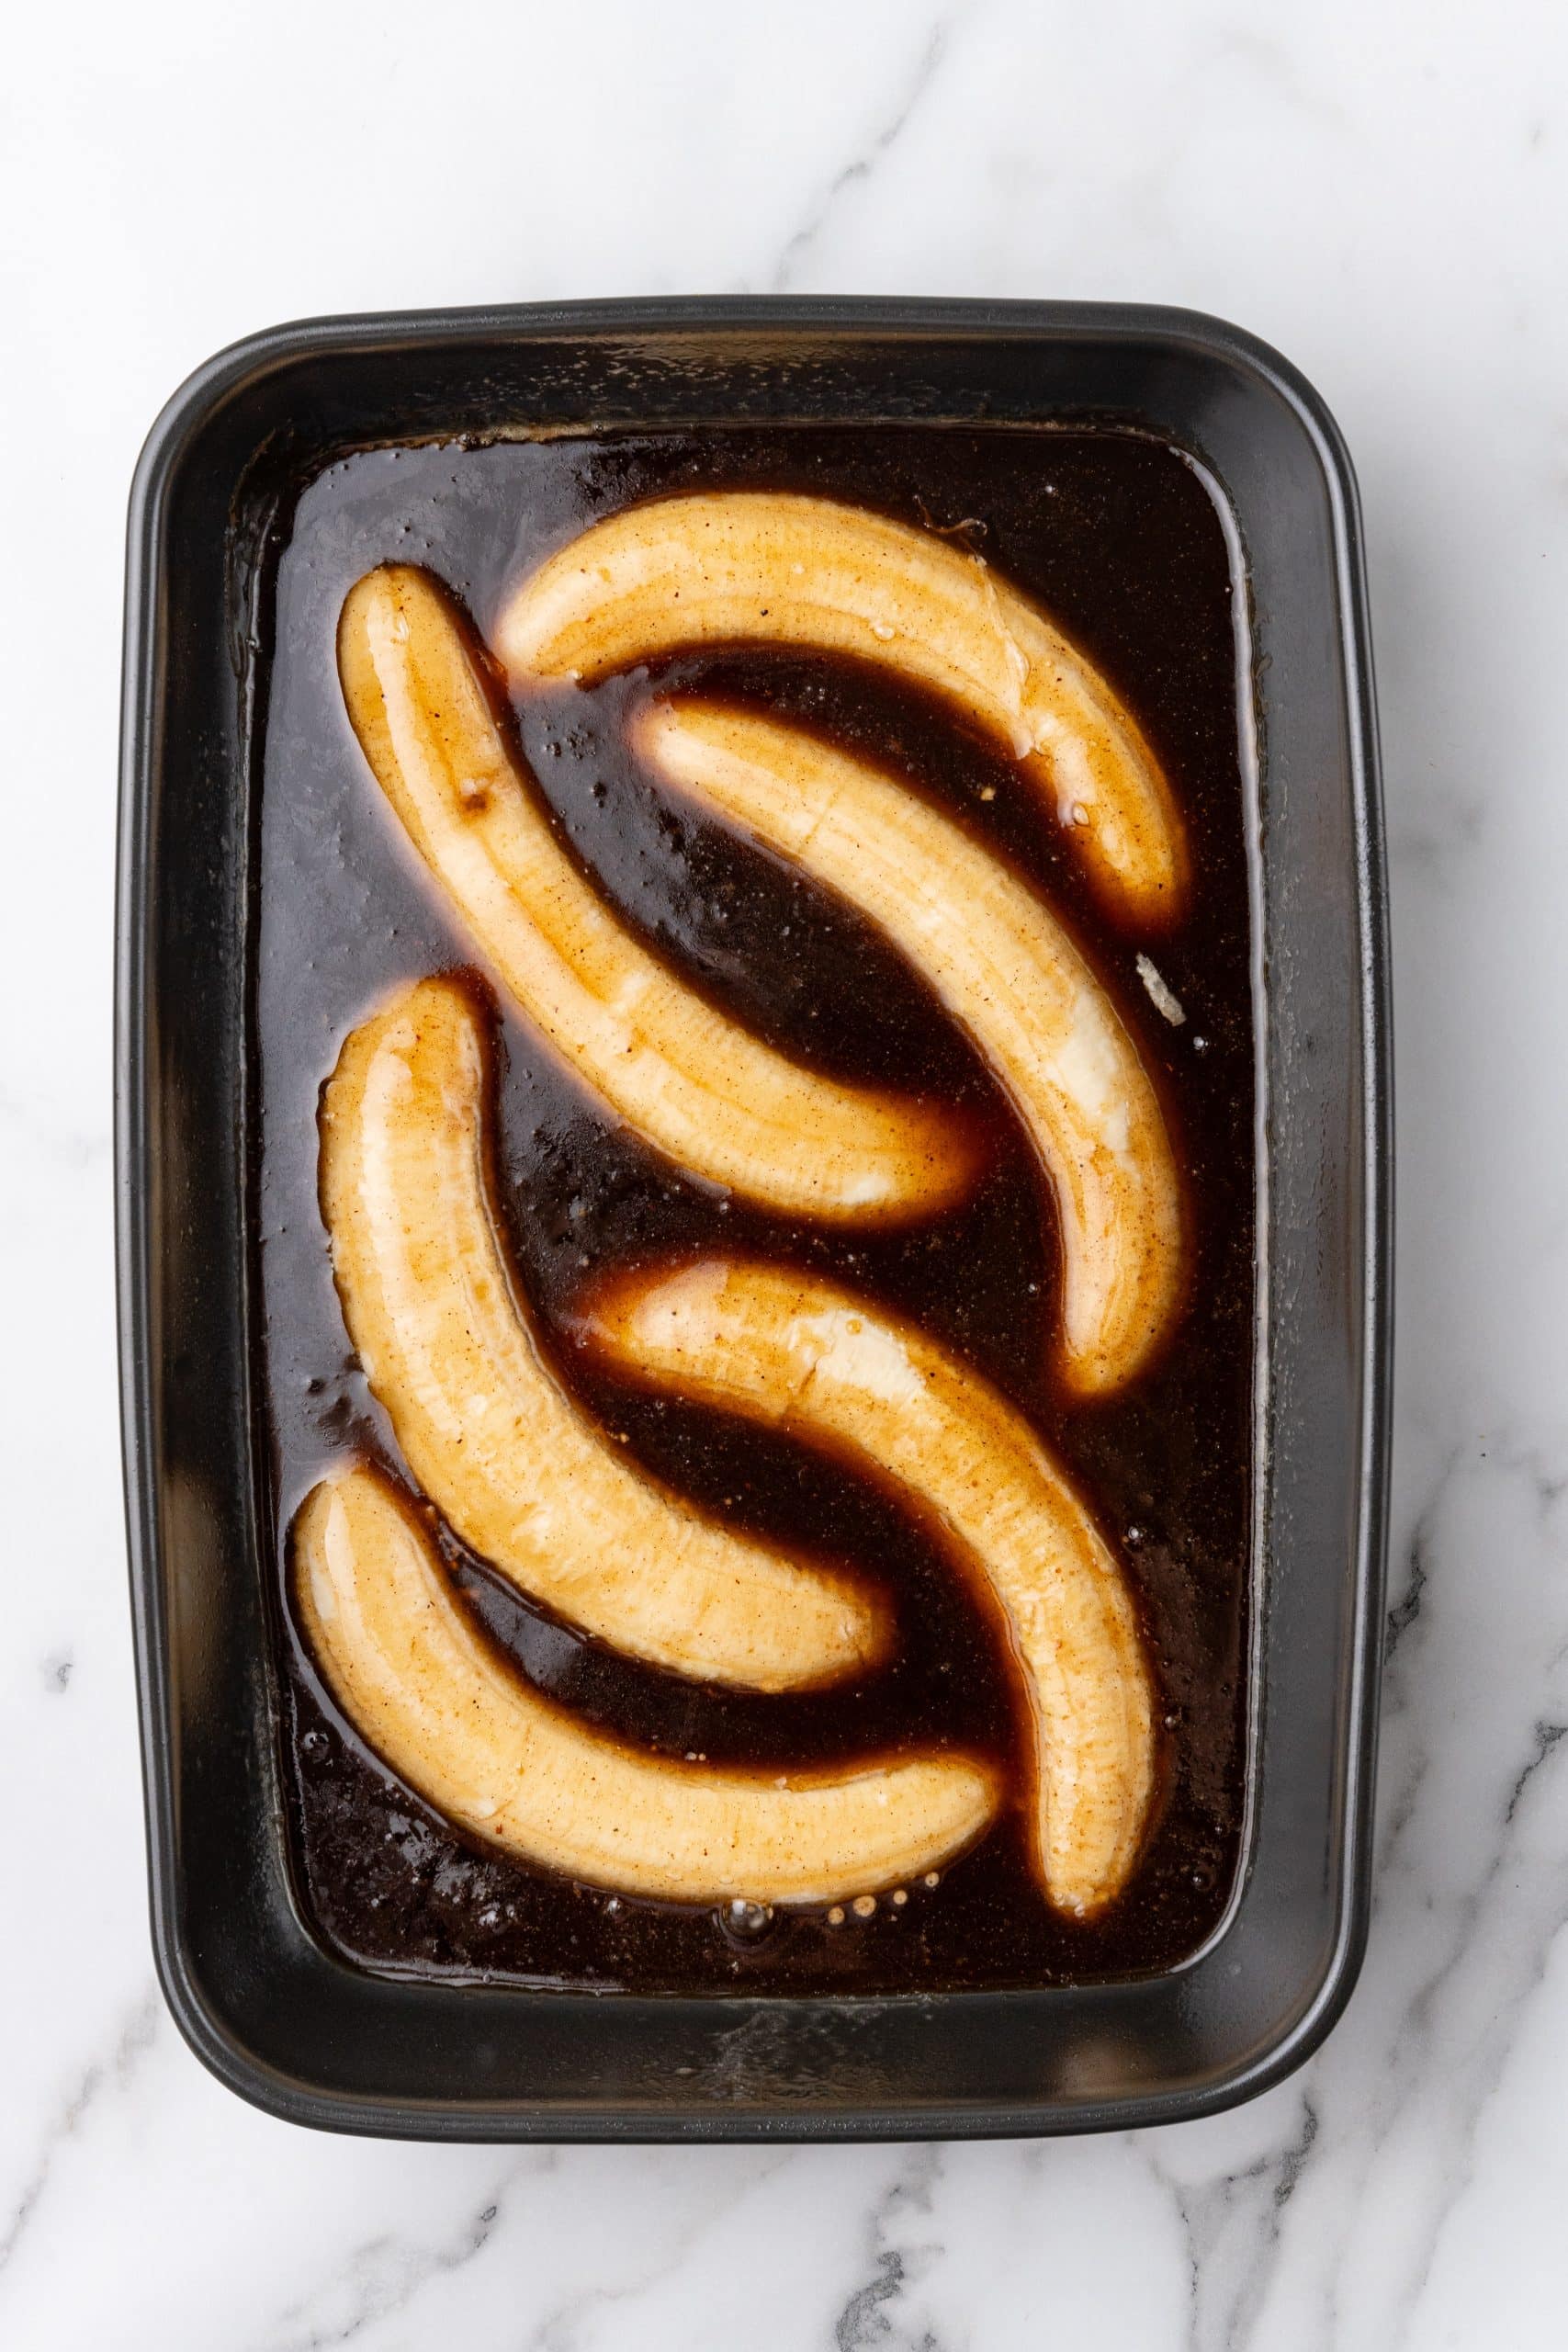 bananas foster rum sauce poured over bananas in a metal brownie pan